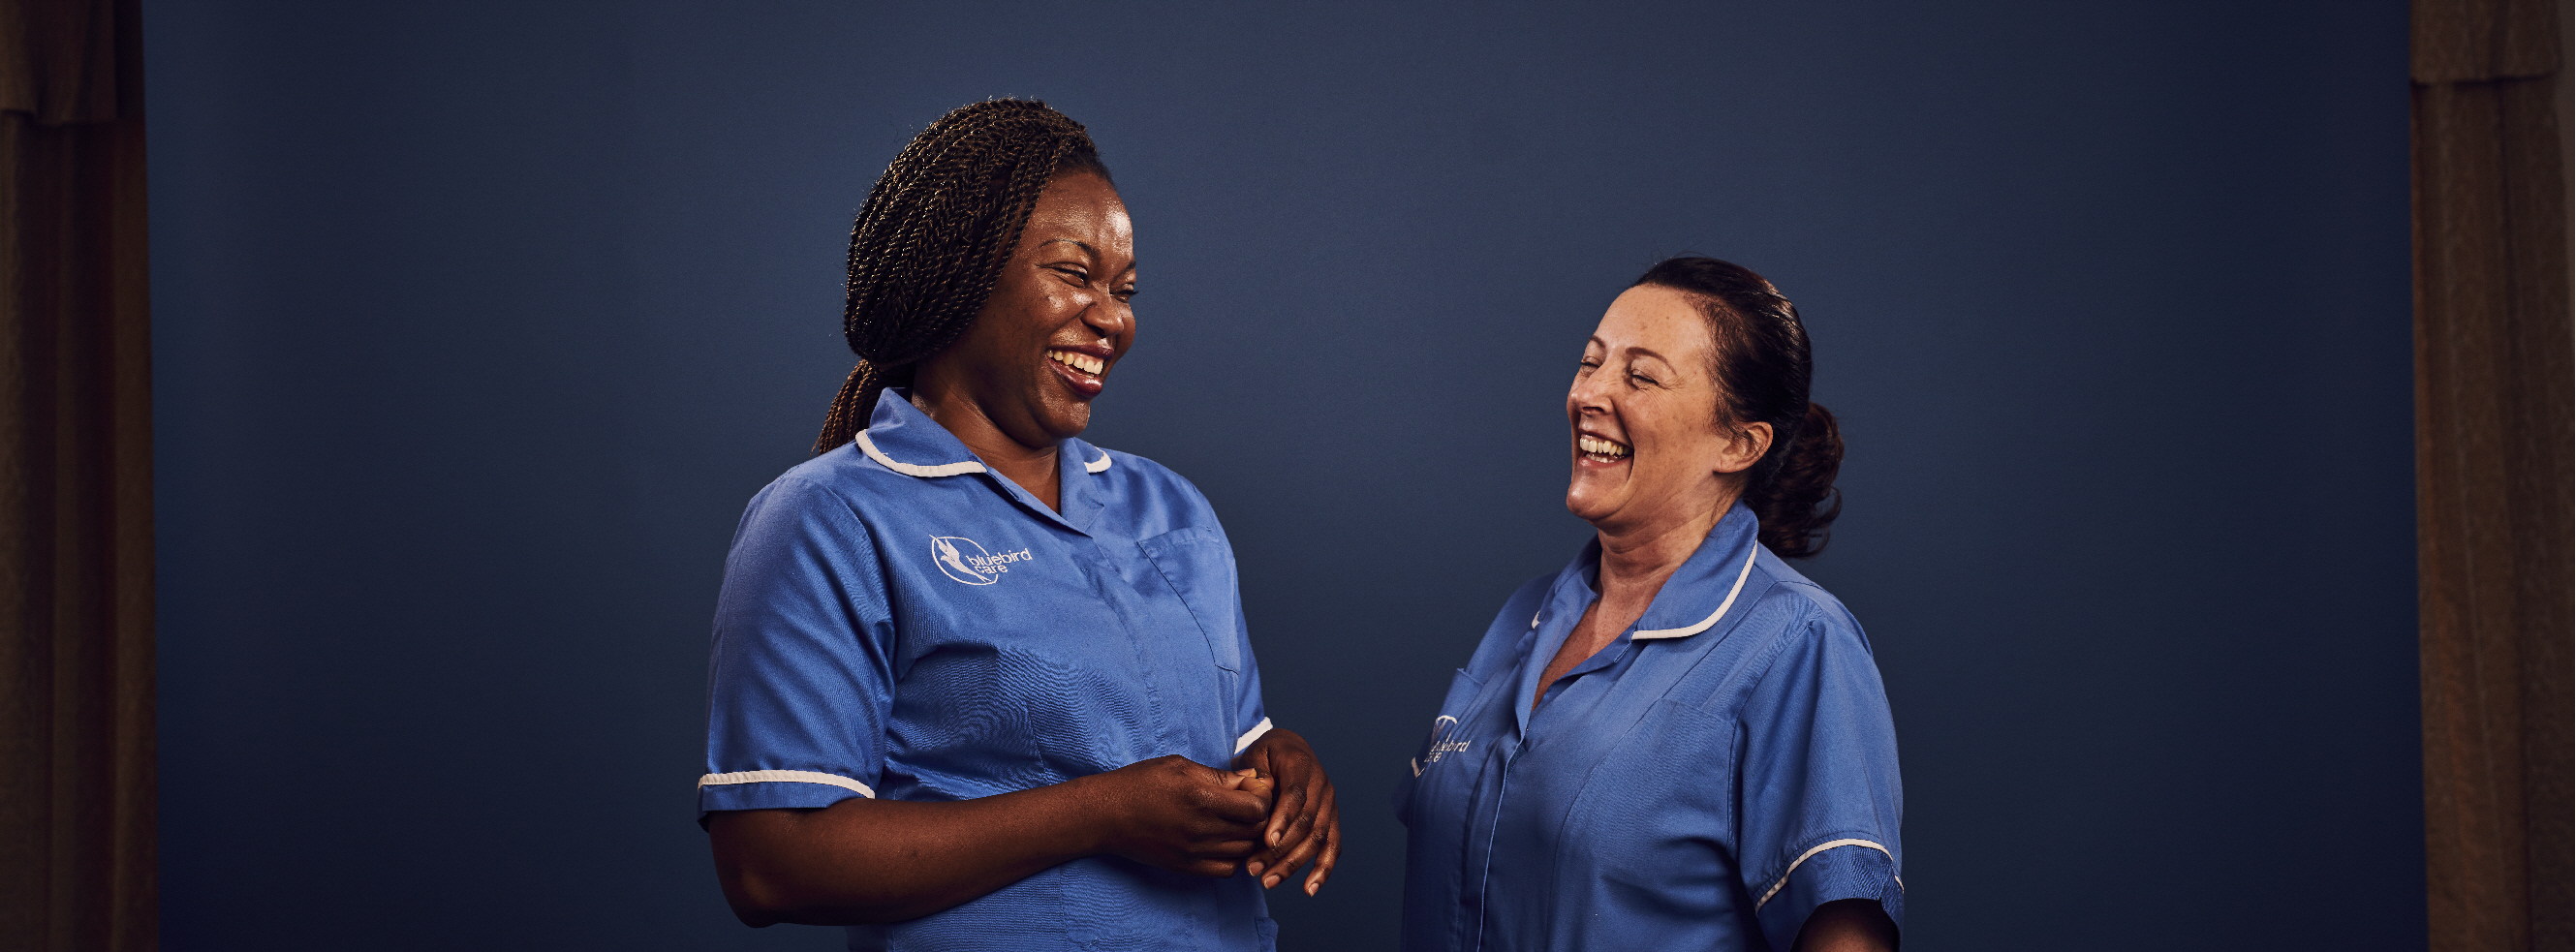 Live-in & Home Care in Wandsworth - Bluebird Care Wandsworth